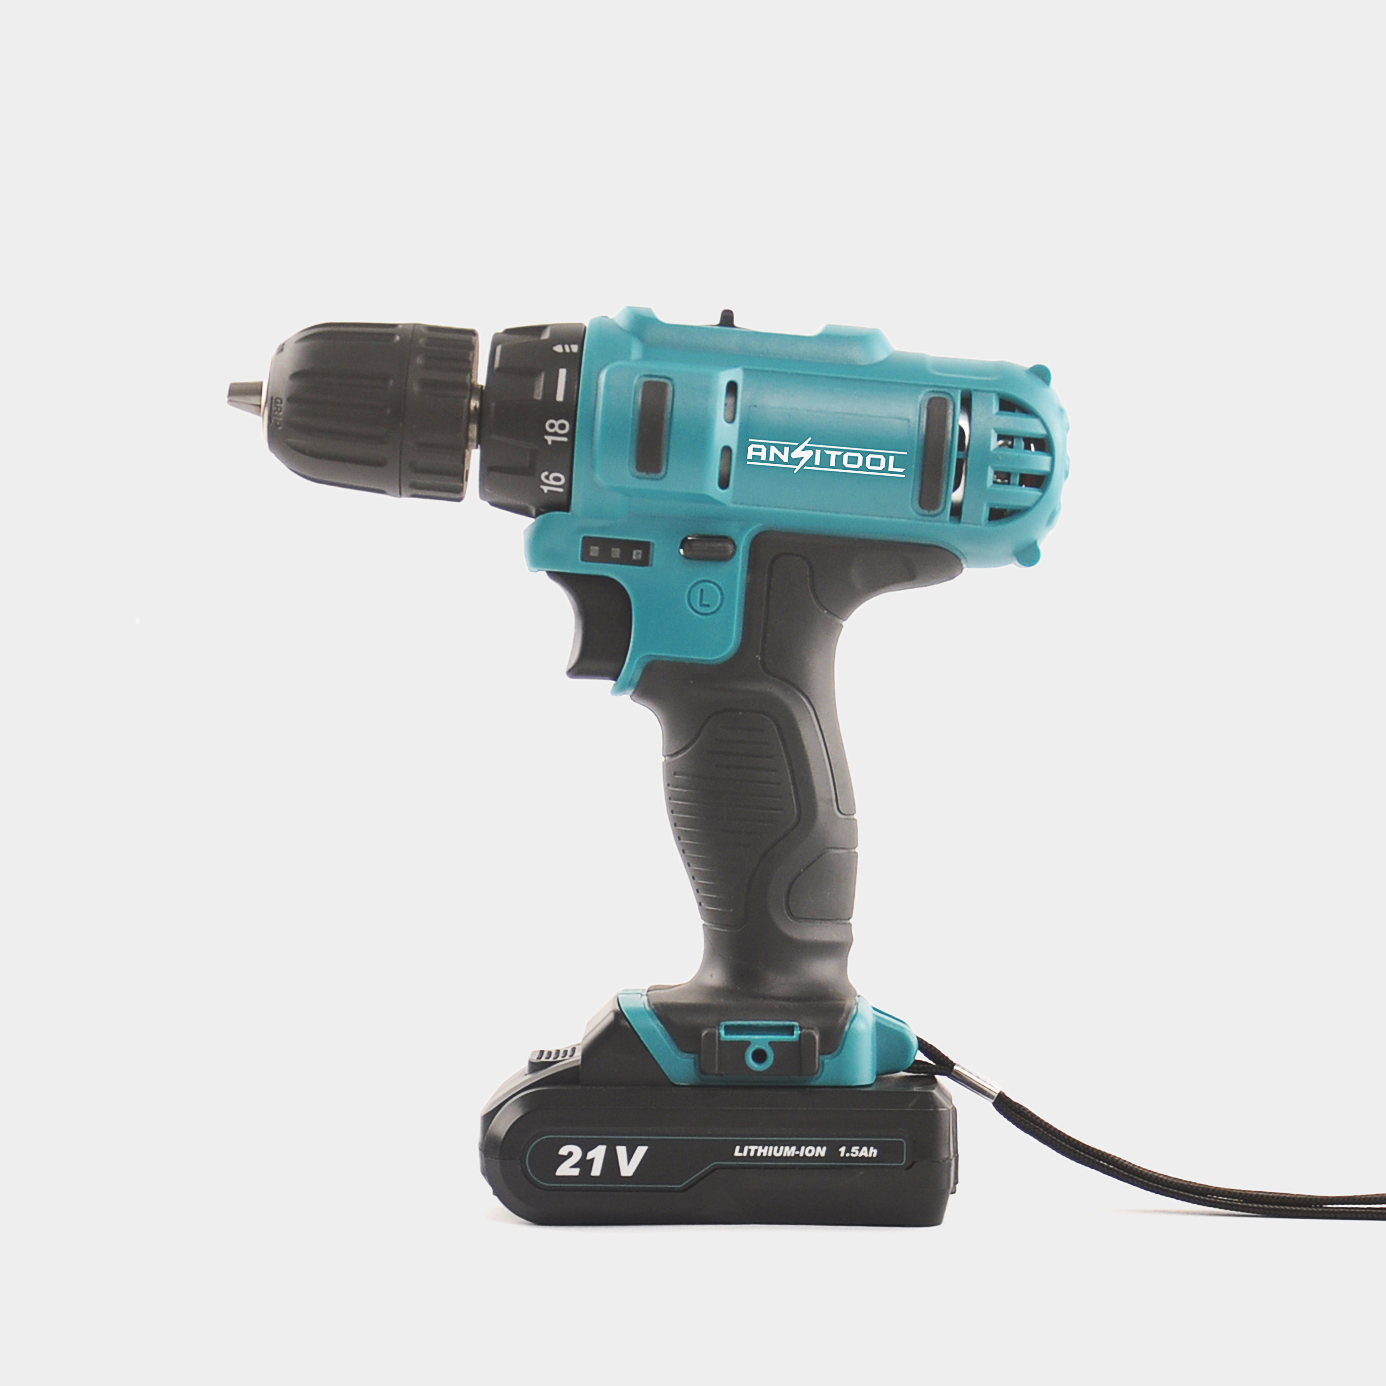 Custom High Performance Rechargeable 12V Cordless Drill with Lithium-ion Battery For Replacement